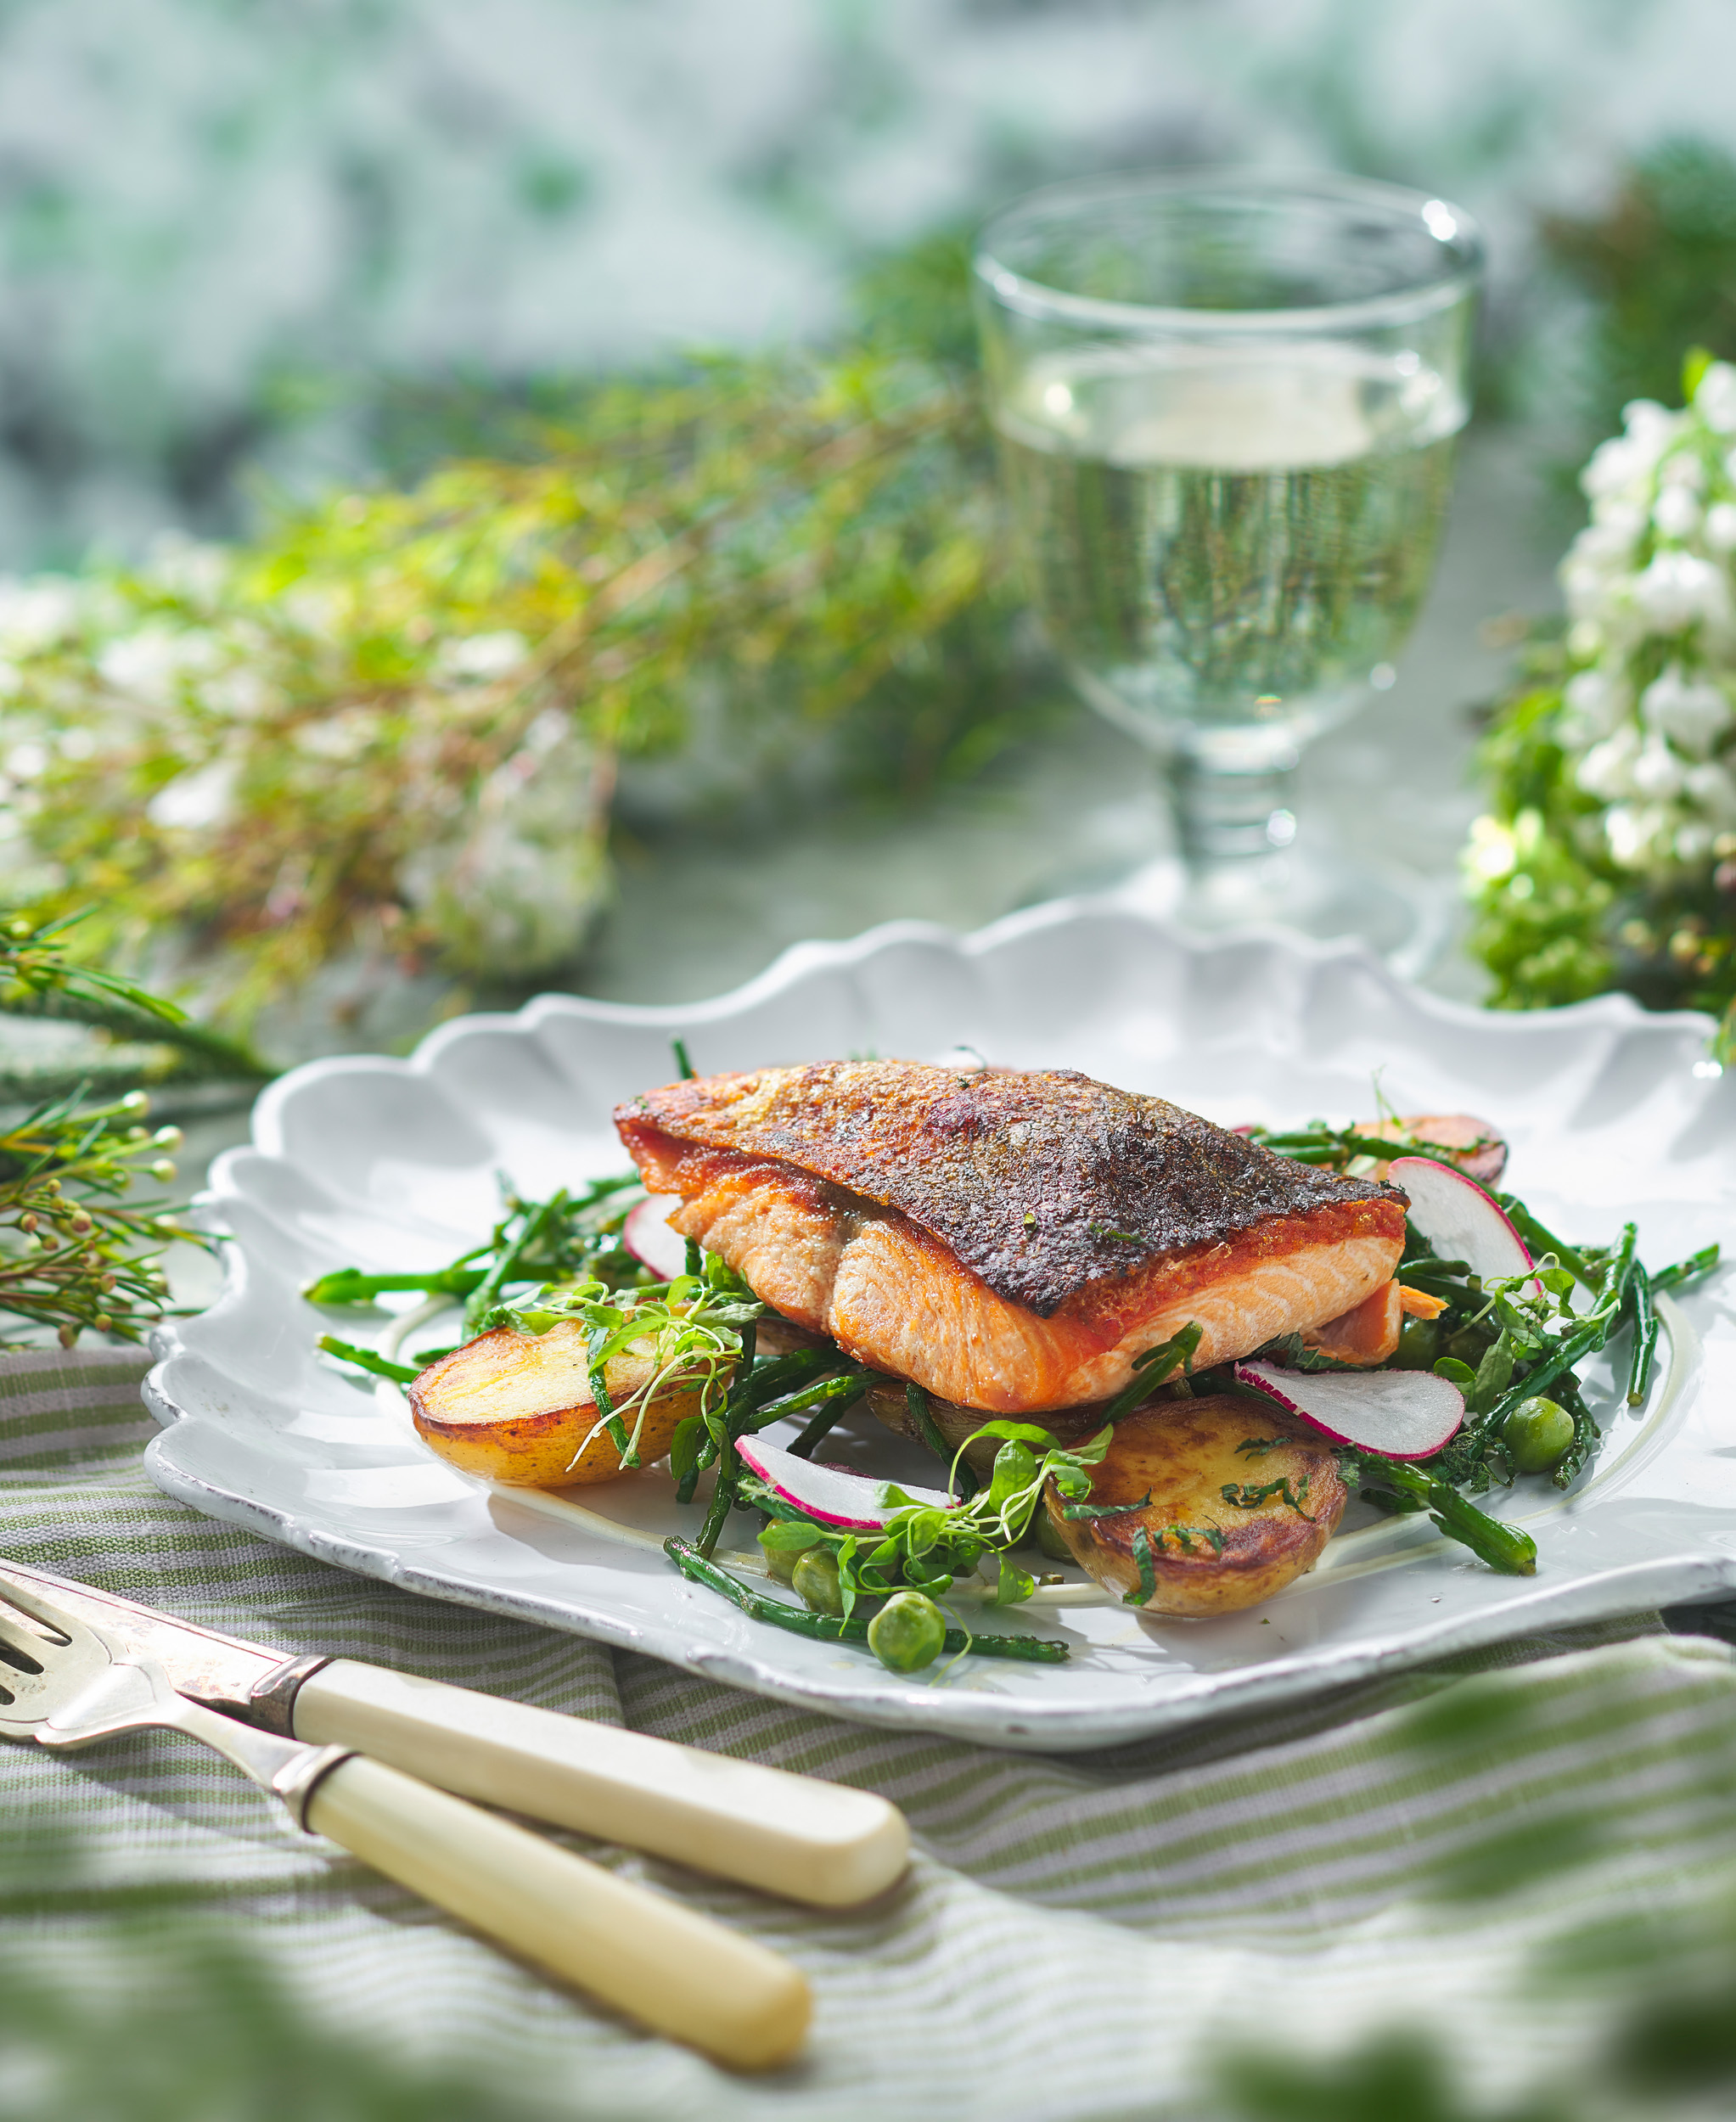 https://www.drakeandmorgan.co.uk/the-anthologist/wp-content/uploads/2022/05/Seafood-Trout-3.jpg